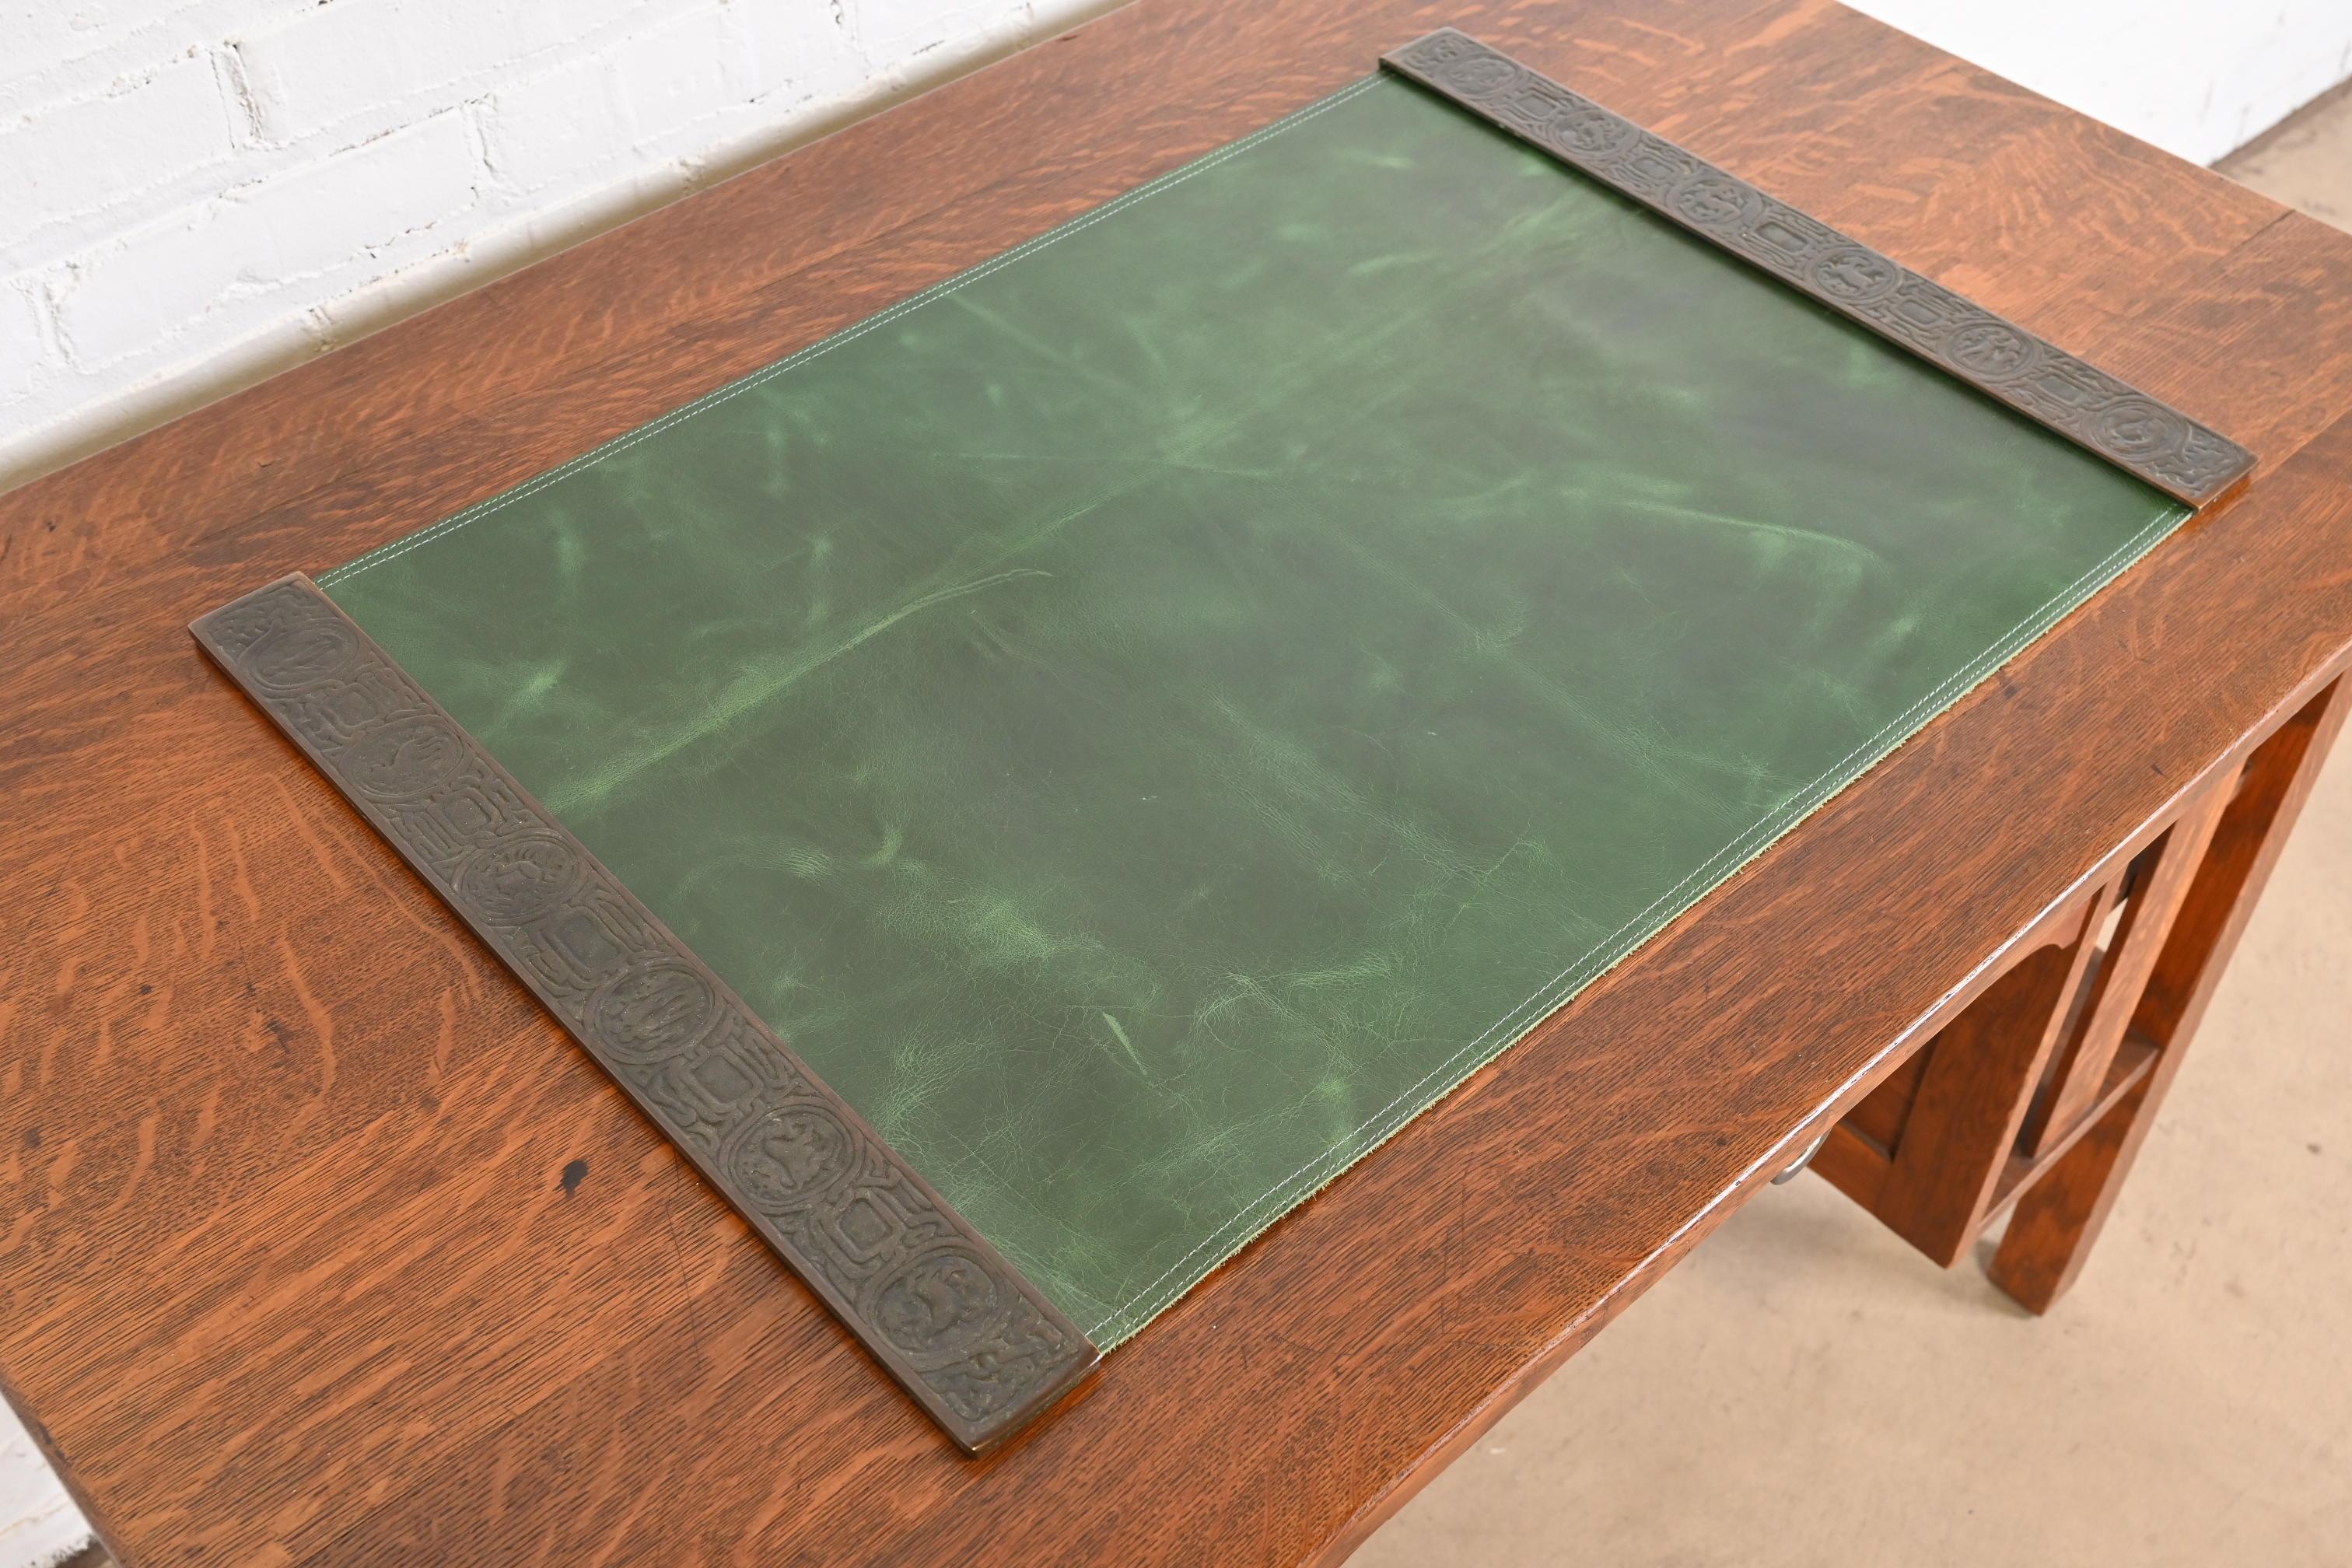 Tiffany Studios New York Zodiac Bronze Blotter Ends With Green Leather Desk Pad In Good Condition For Sale In South Bend, IN